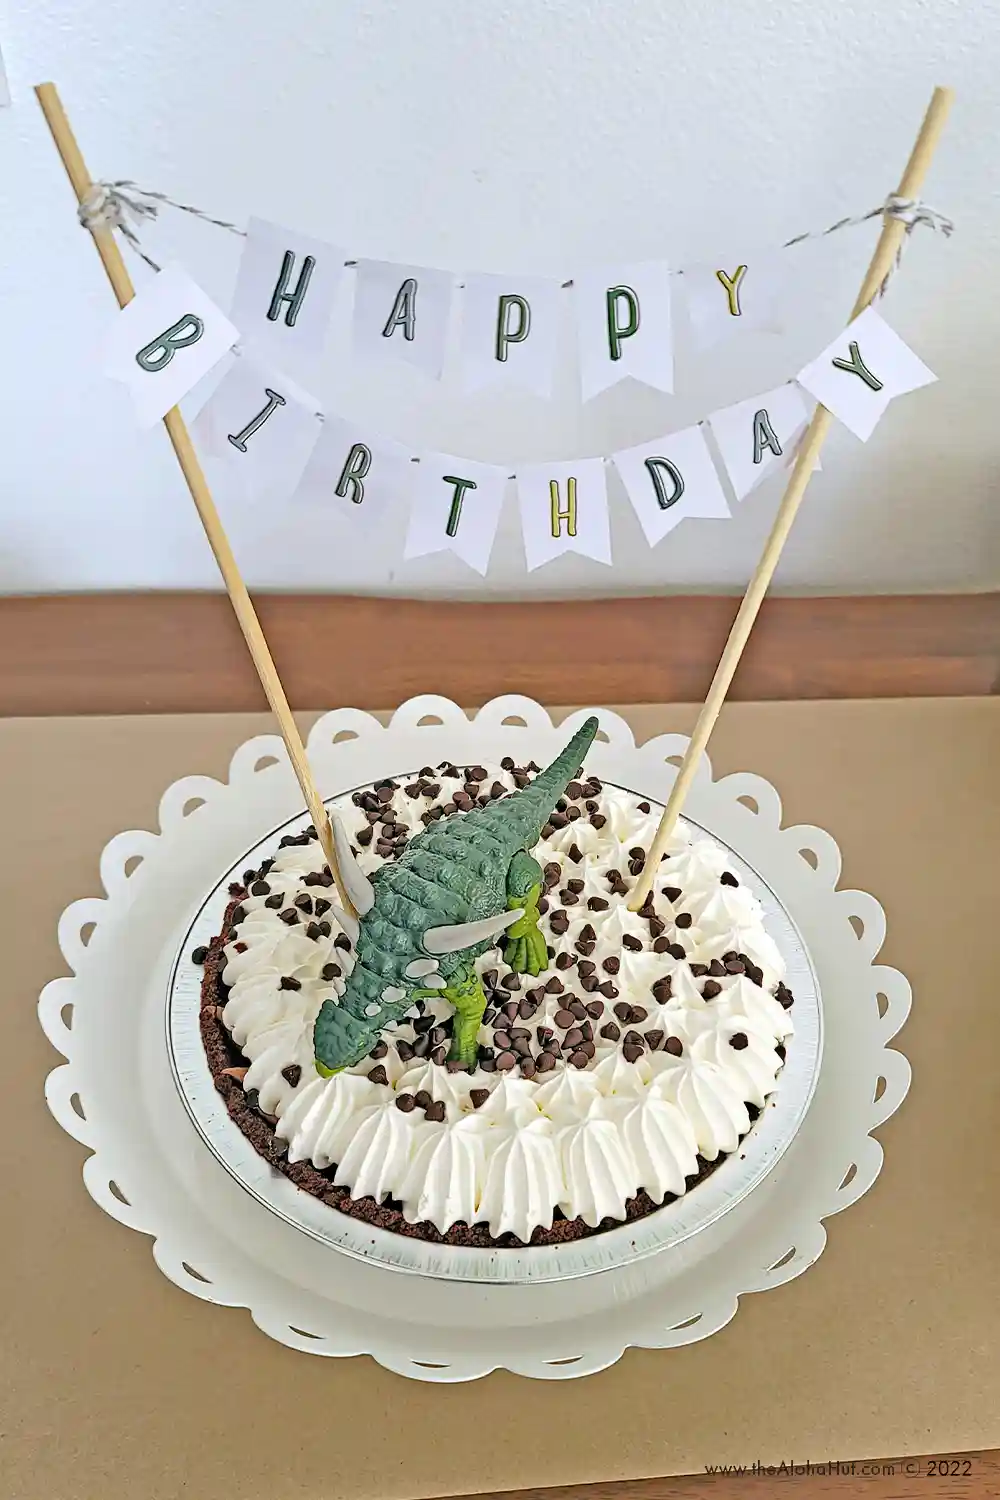 Jurassic World Camp Cretaceous Party Ideas - Dinosaur Party Ideas - free printable party decor & games - banner cake topper